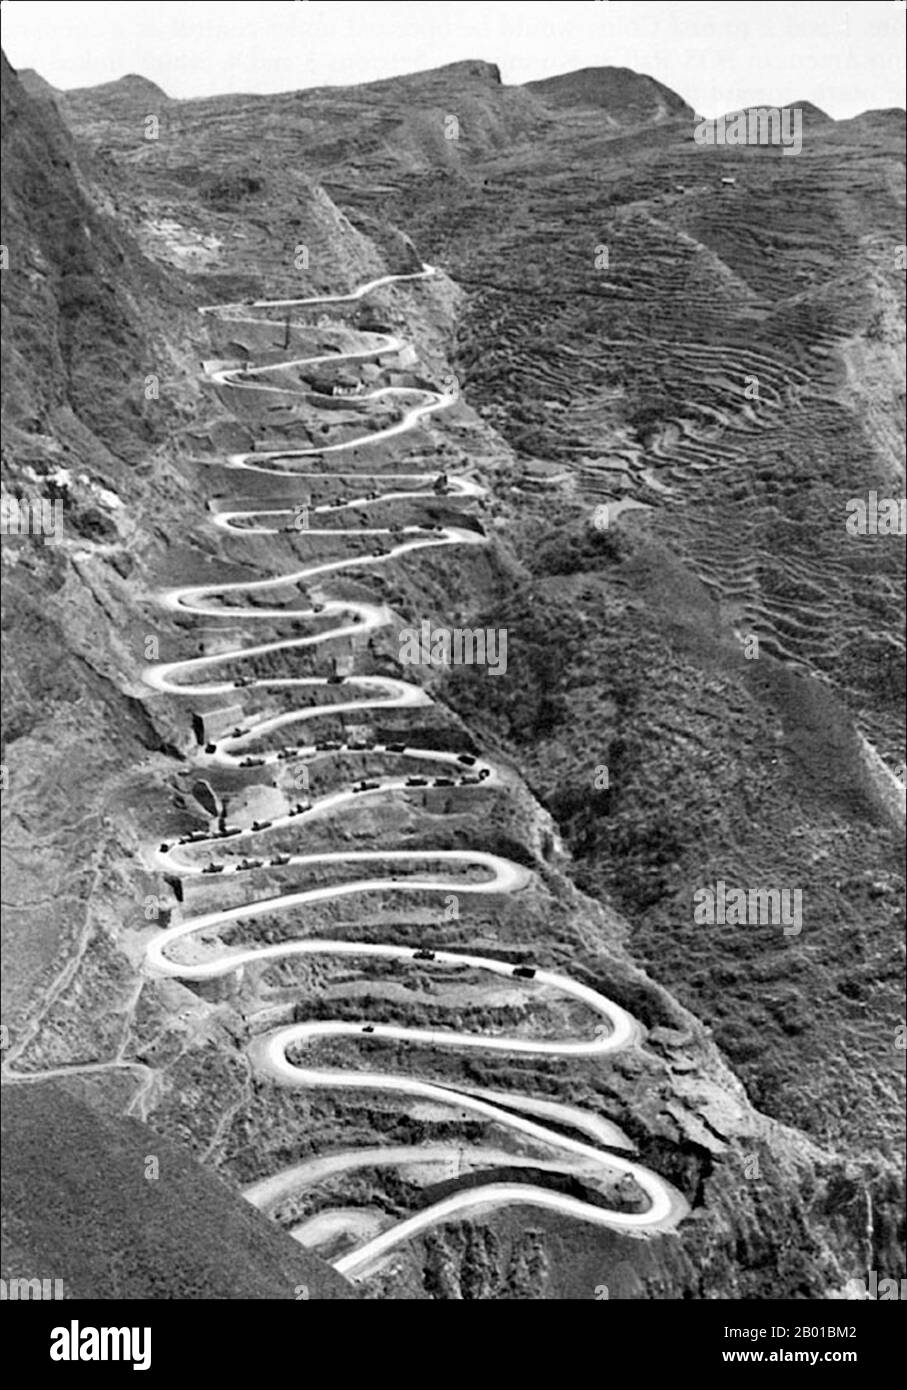 the-burma-road-is-a-road-linking-burma-also-called-myanmar-with-china-its-terminals-are-kunming-yunnan-and-lashio-burma-when-it-was-built-burma-was-a-british-colony-under-japanese-occupation-the-road-is-717-miles-1154-km-long-and-runs-through-rough-mountain-country-the-sections-from-kunming-to-the-burmese-border-were-built-by-200000-chinese-laborers-during-the-second-sino-japanese-war-in-1937-and-completed-by-1938-it-had-a-role-in-world-war-ii-when-the-british-used-the-burma-road-to-transport-materiel-to-china-before-japan-was-at-war-with-the-british-supplies-would-be-landed-2B01BM2.jpg